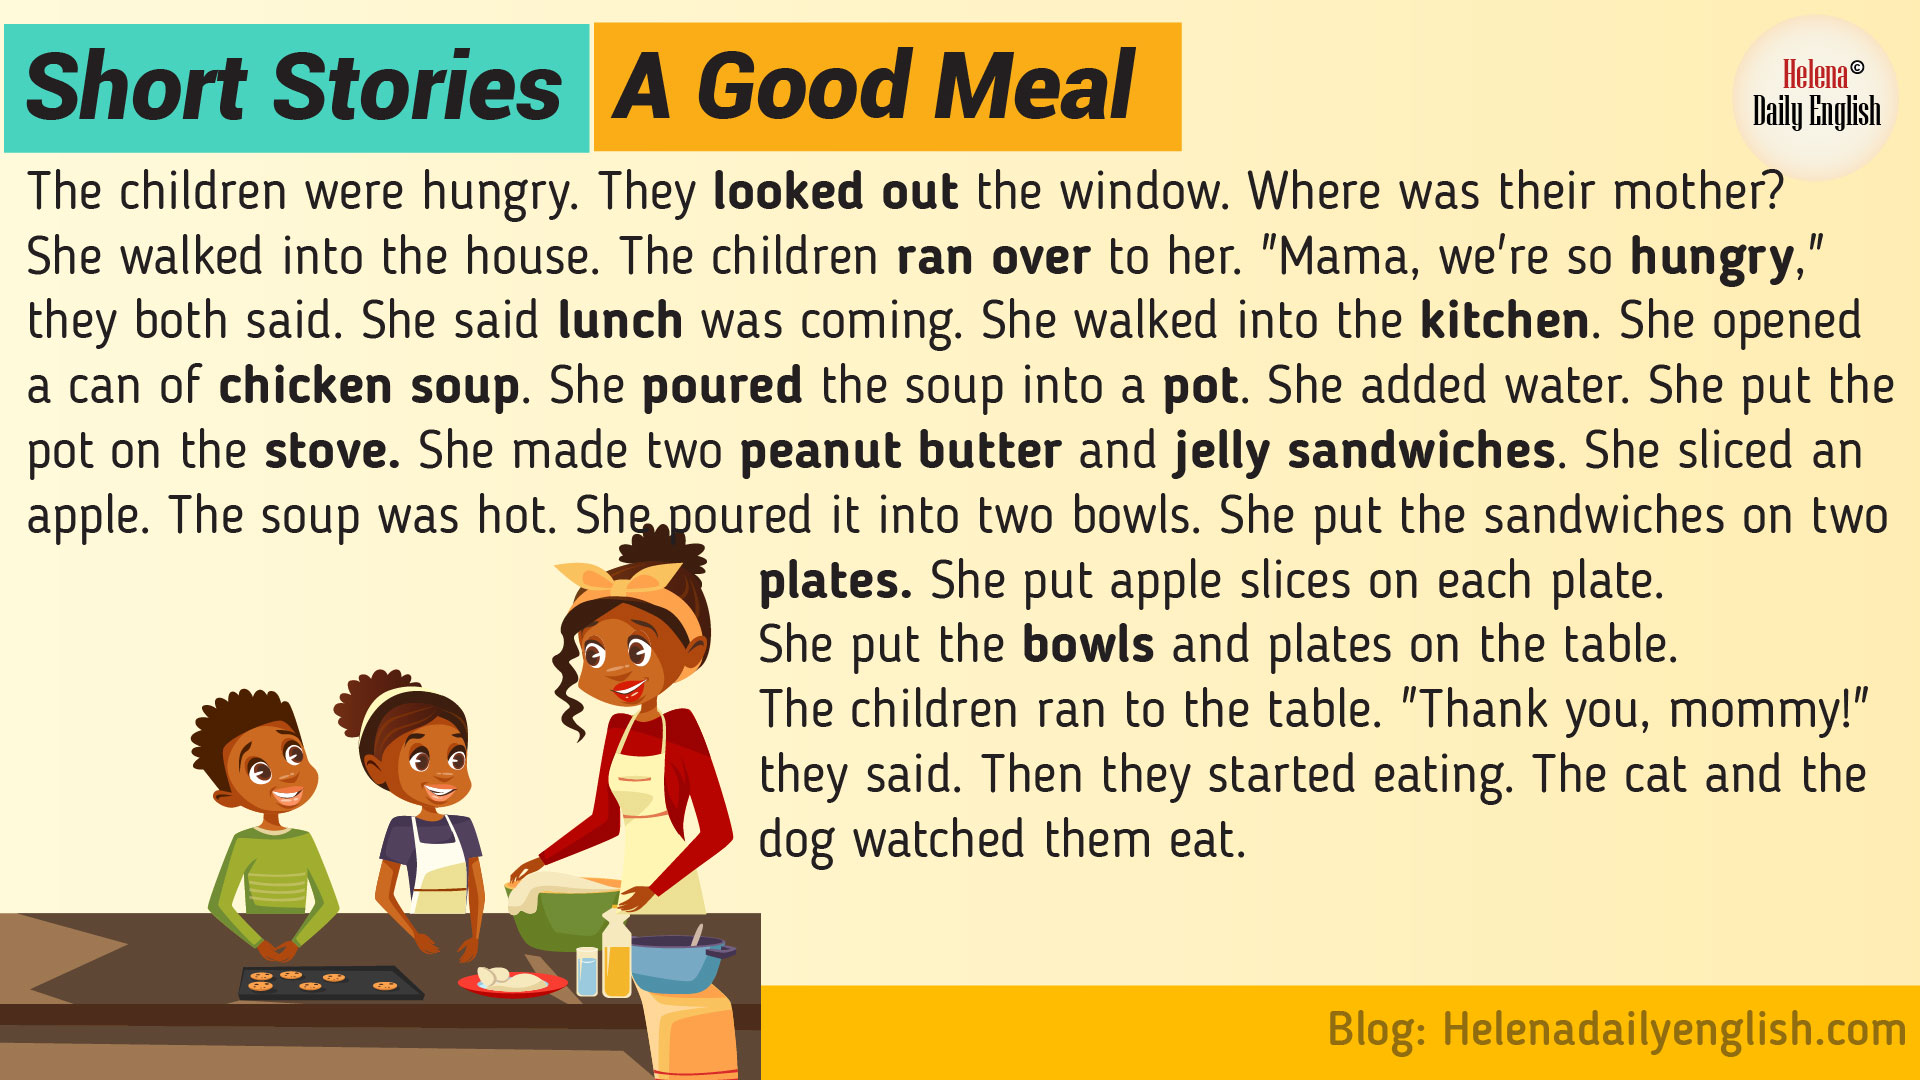 Short Stories in English: A Good Meal